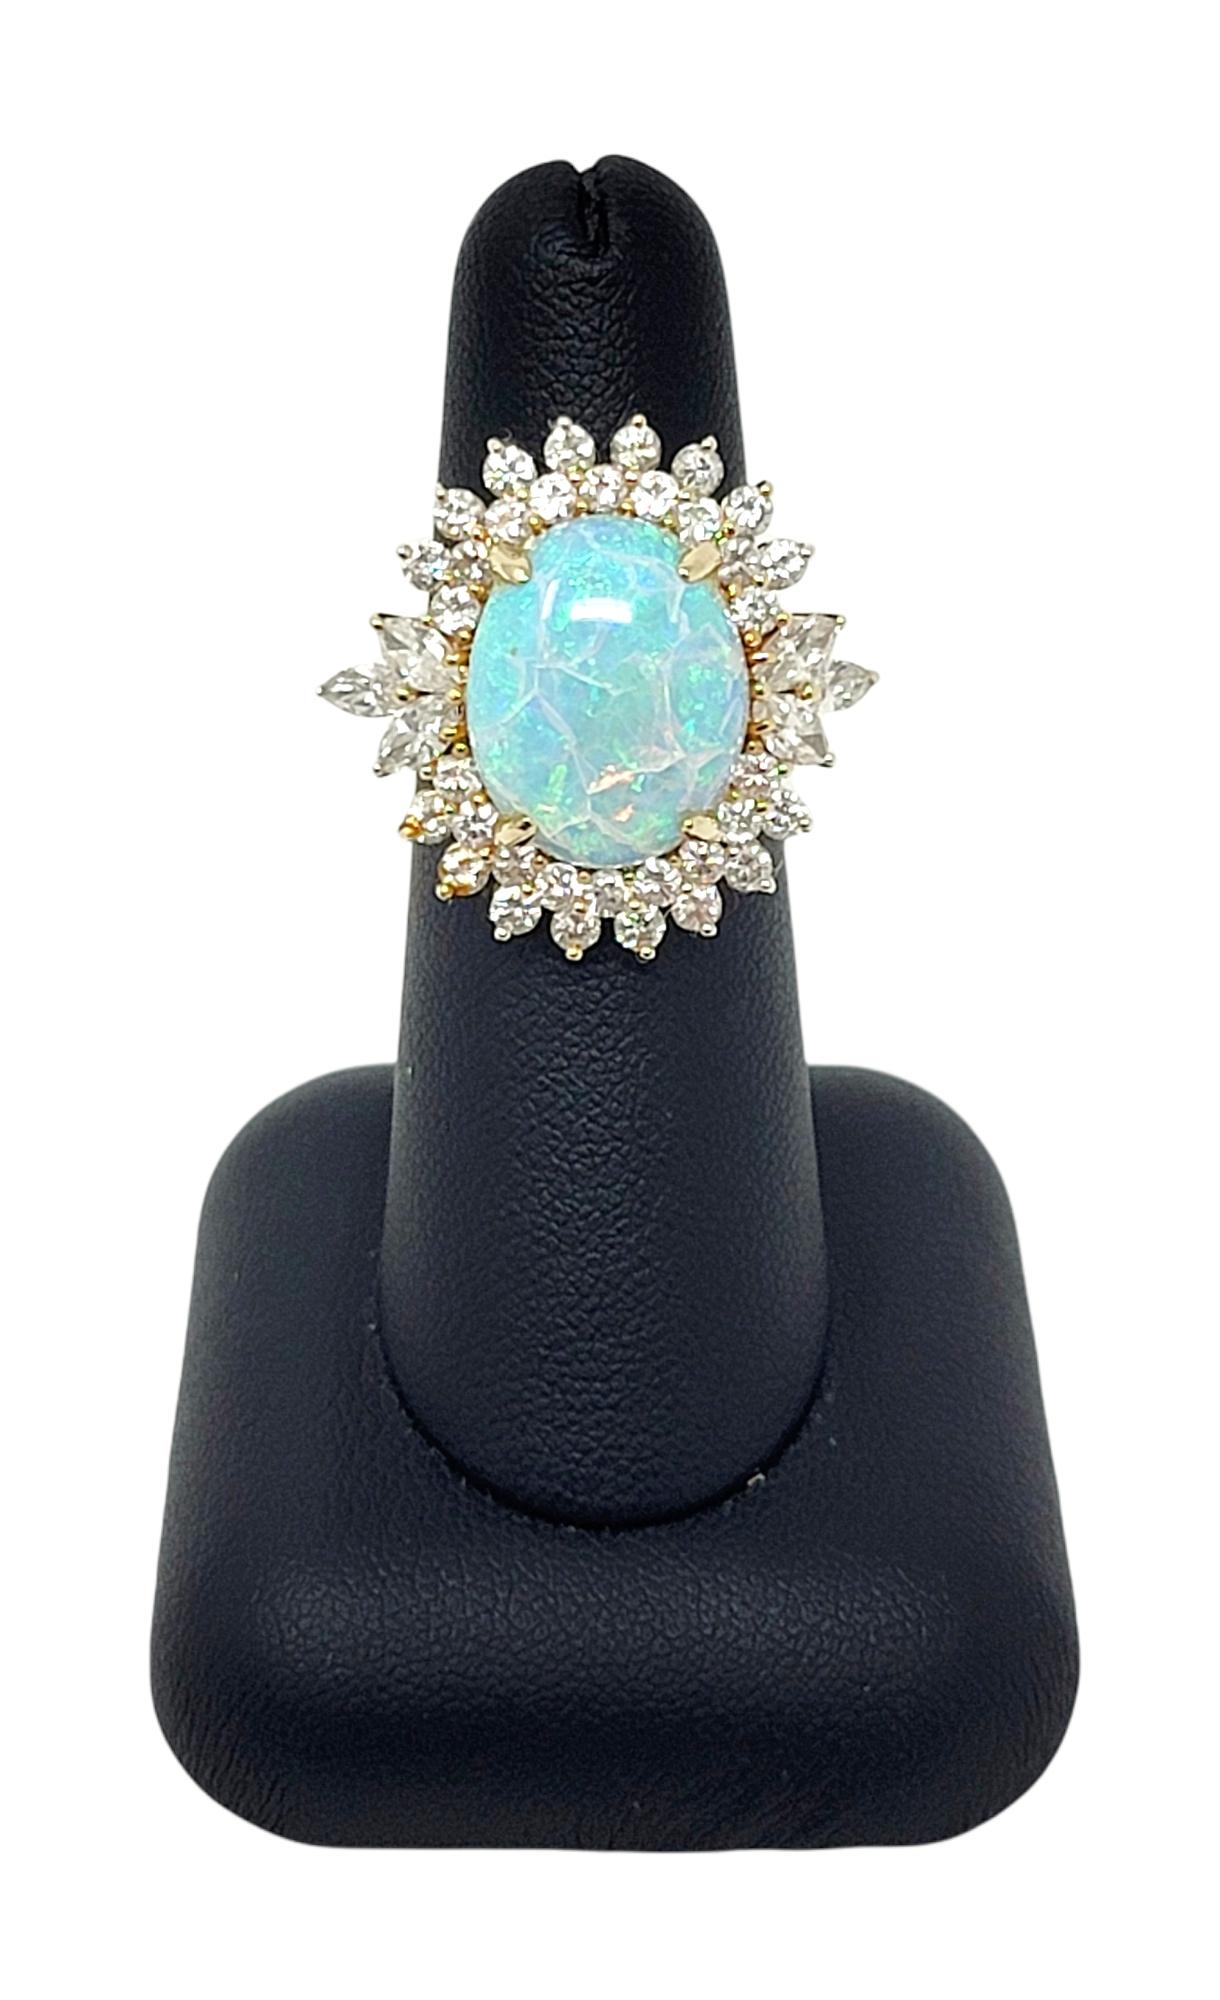 7.55 Carats Total Opal Cabochon and Diamond Halo Ring in 14 Karat Yellow Gold For Sale 6